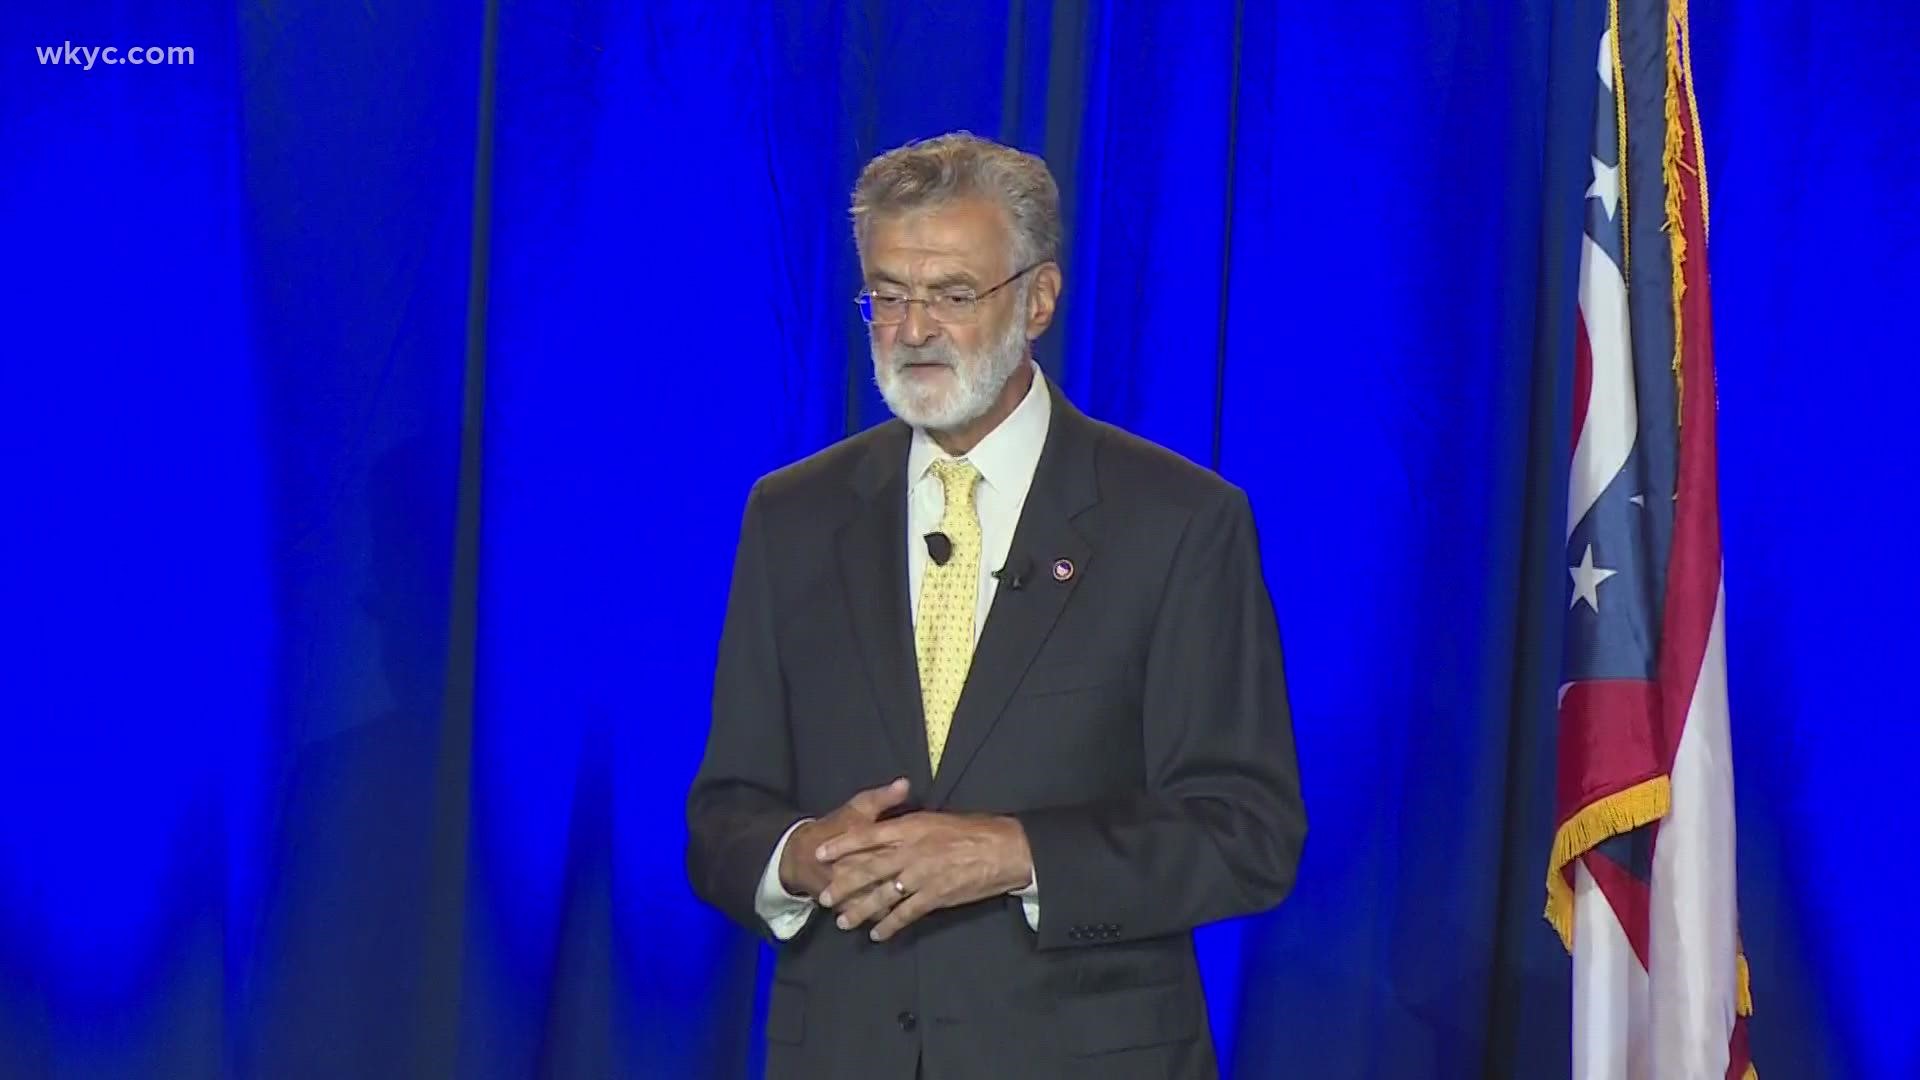 After nearly 16 years leading the city, Cleveland mayor Frank Jackson is giving his final address. Mark Naymik has more on his legacy.